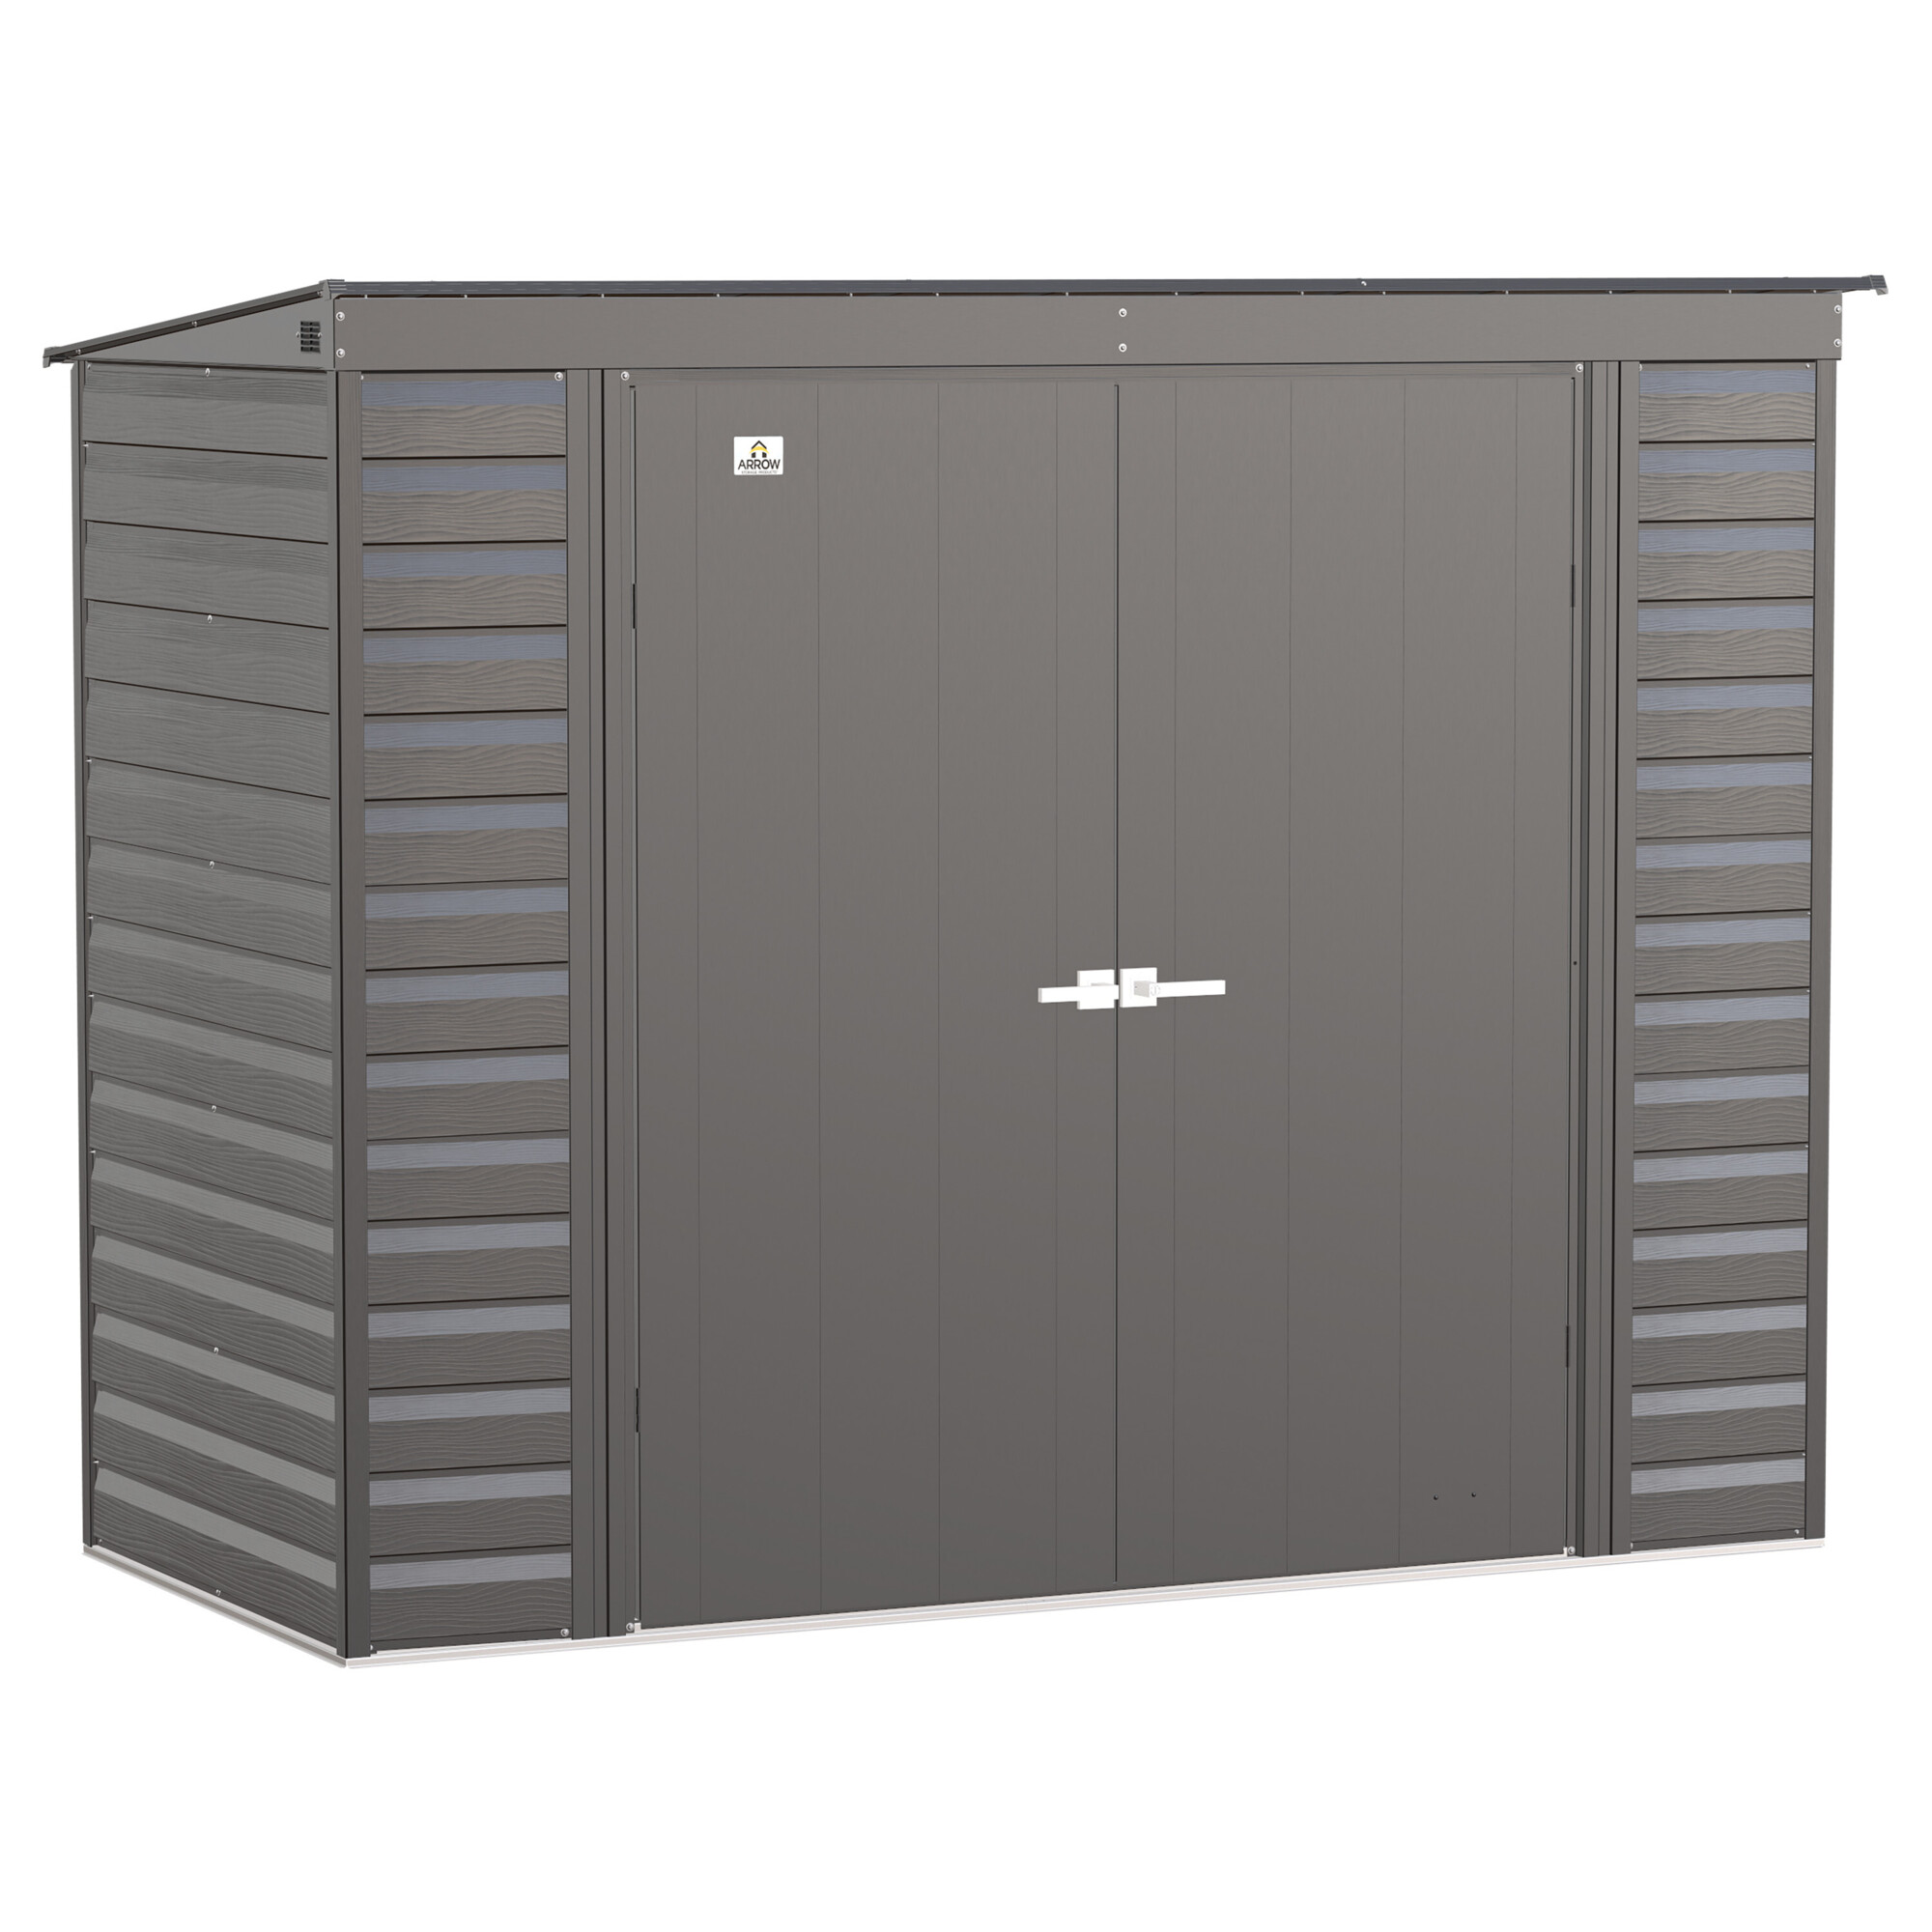 Arrow Storage Products, Select Steel Shed 8x4 Charcoal SCP84CC, Length 4 ft, Width 8 ft, Model SCP84CC